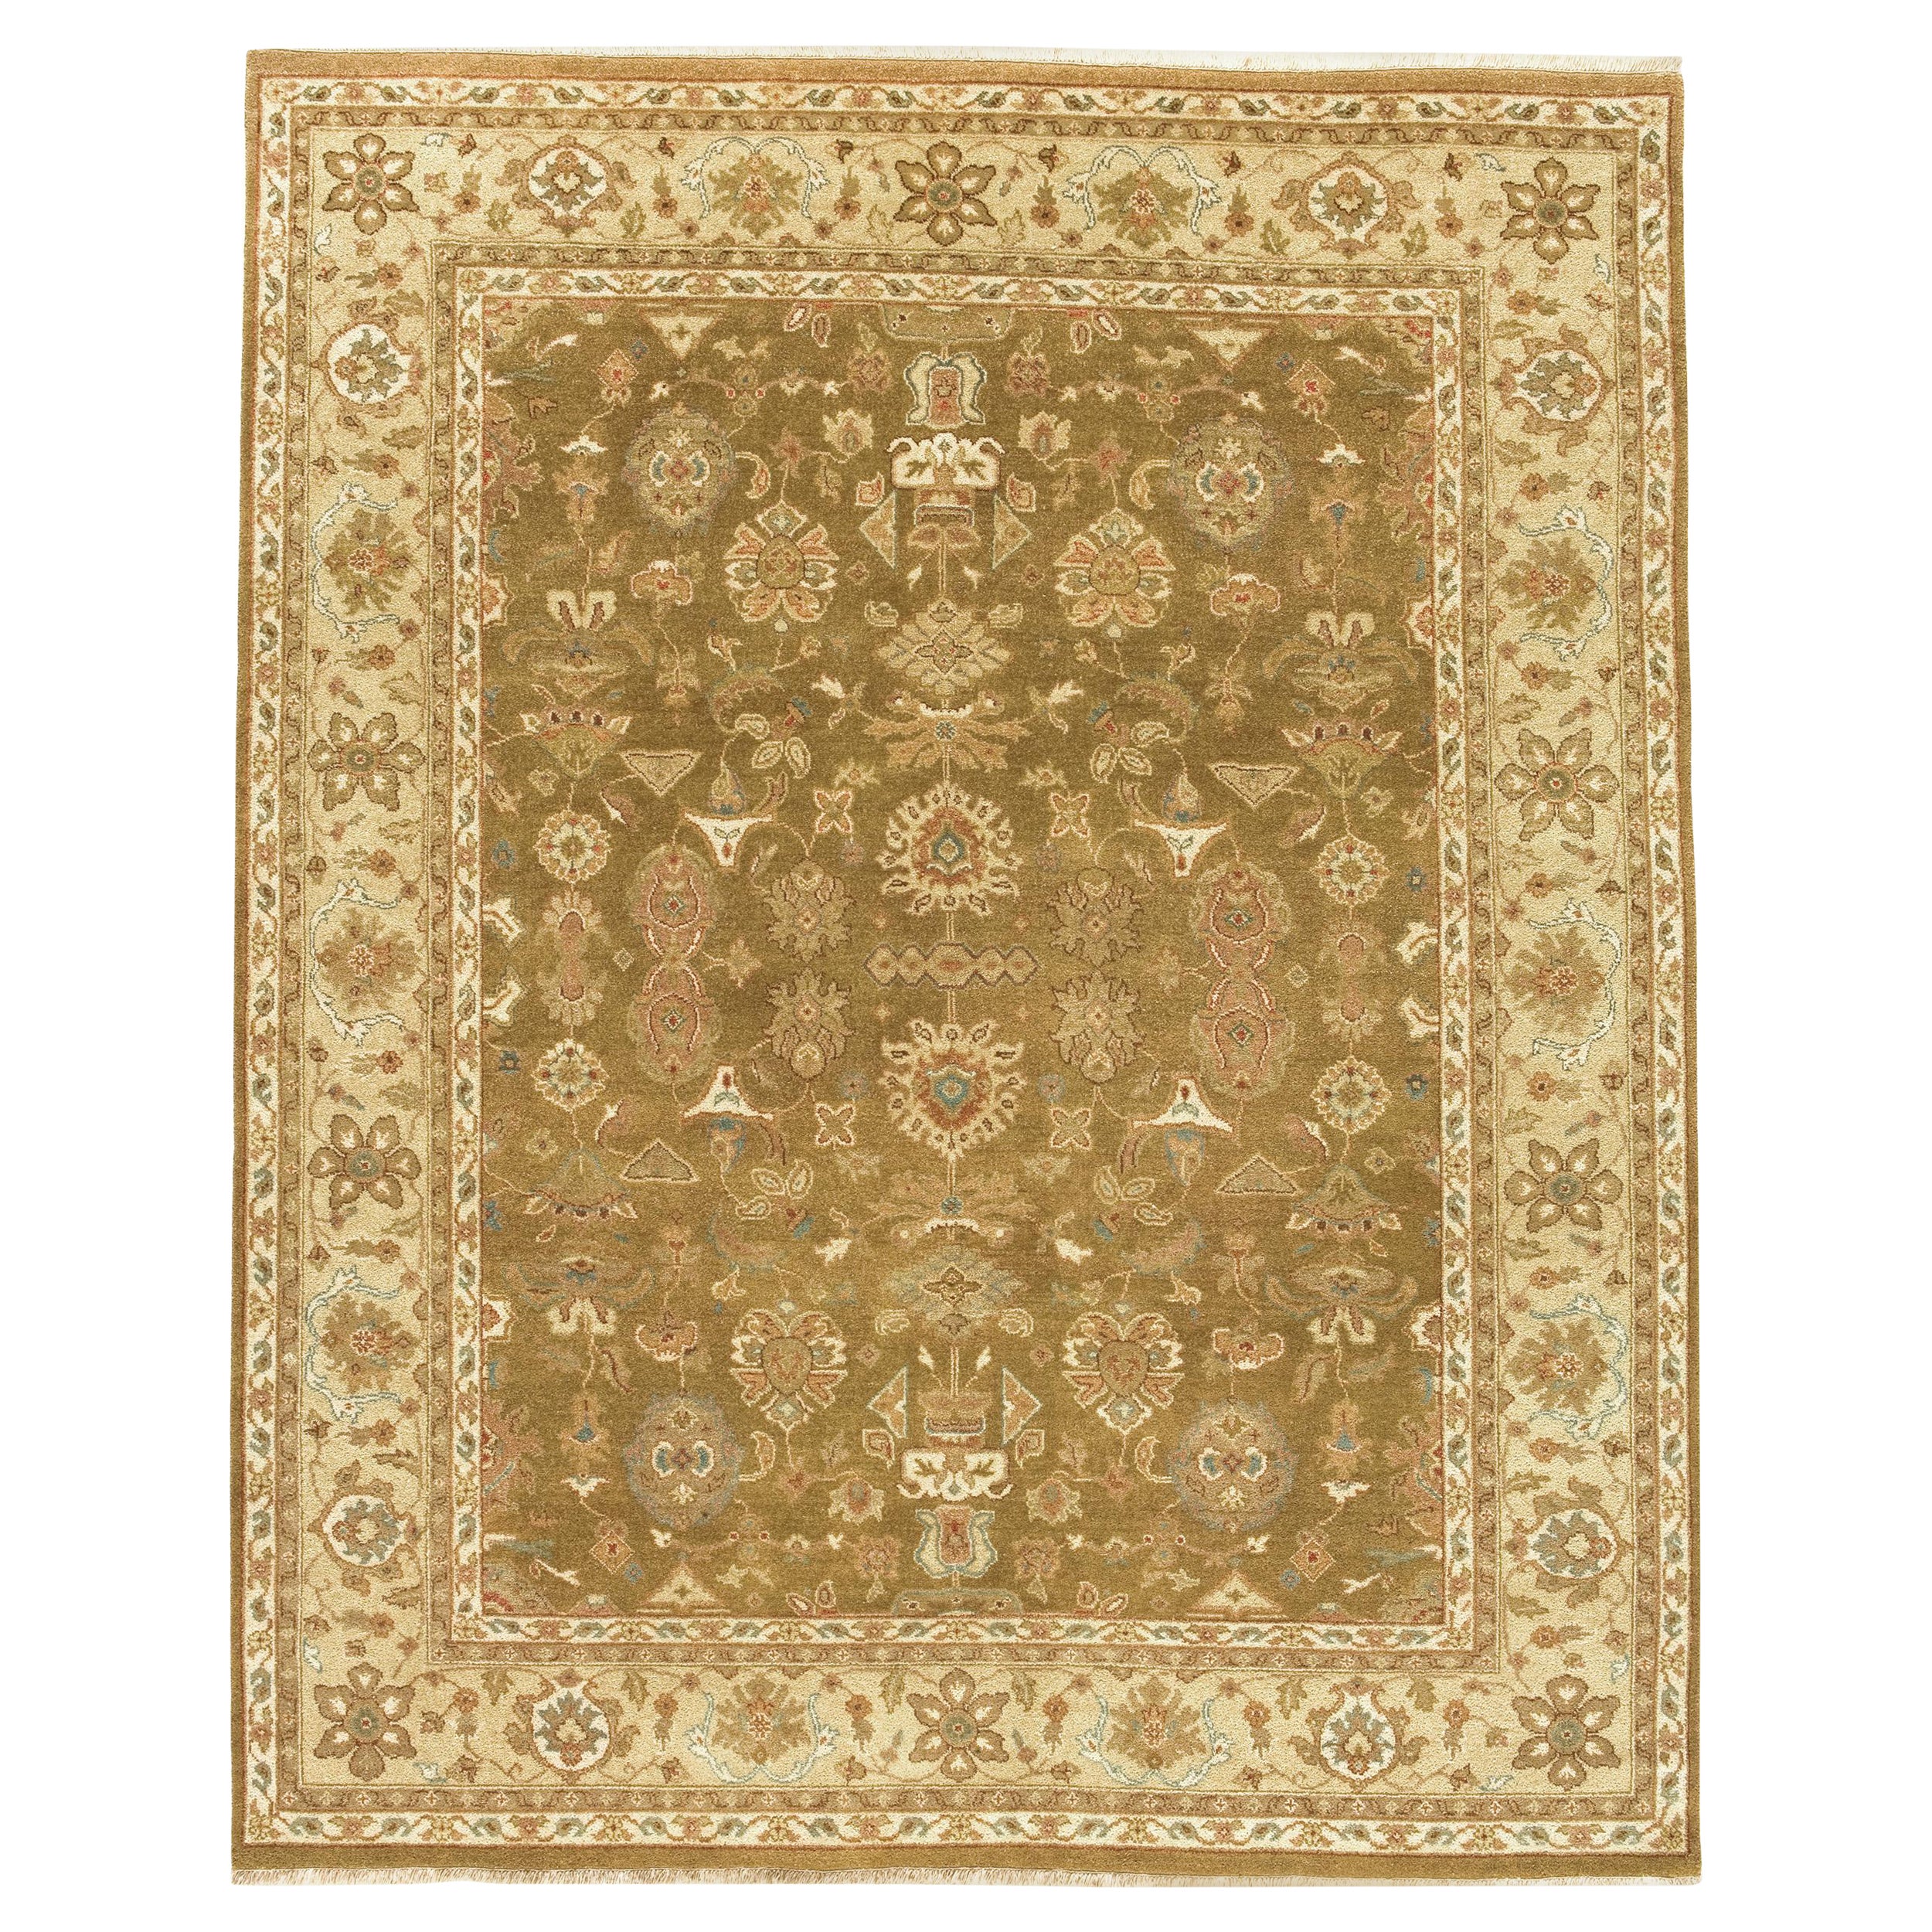 Luxury Traditional Hand-Knotted Mahal Camel & Gold 11x19 Rug